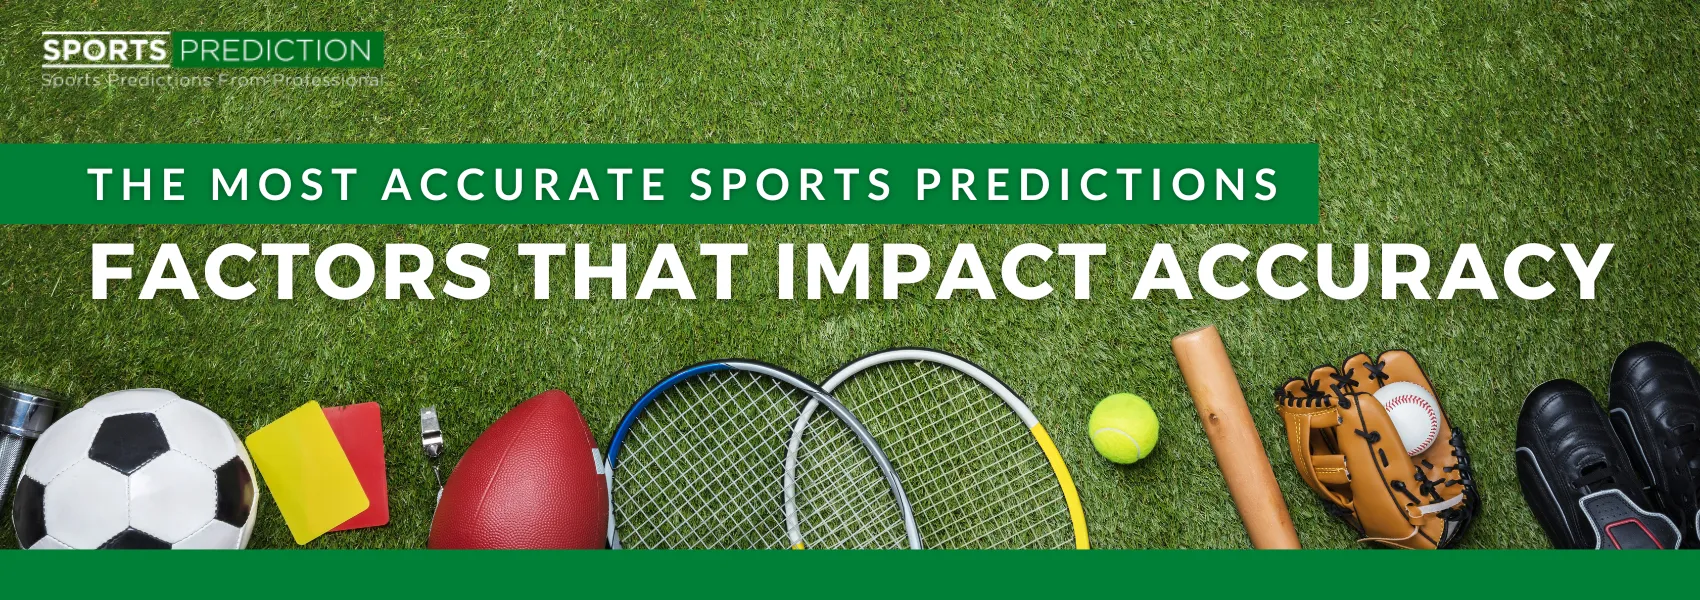 The Most Accurate Sports Predictions: Factors That Impact Accuracy